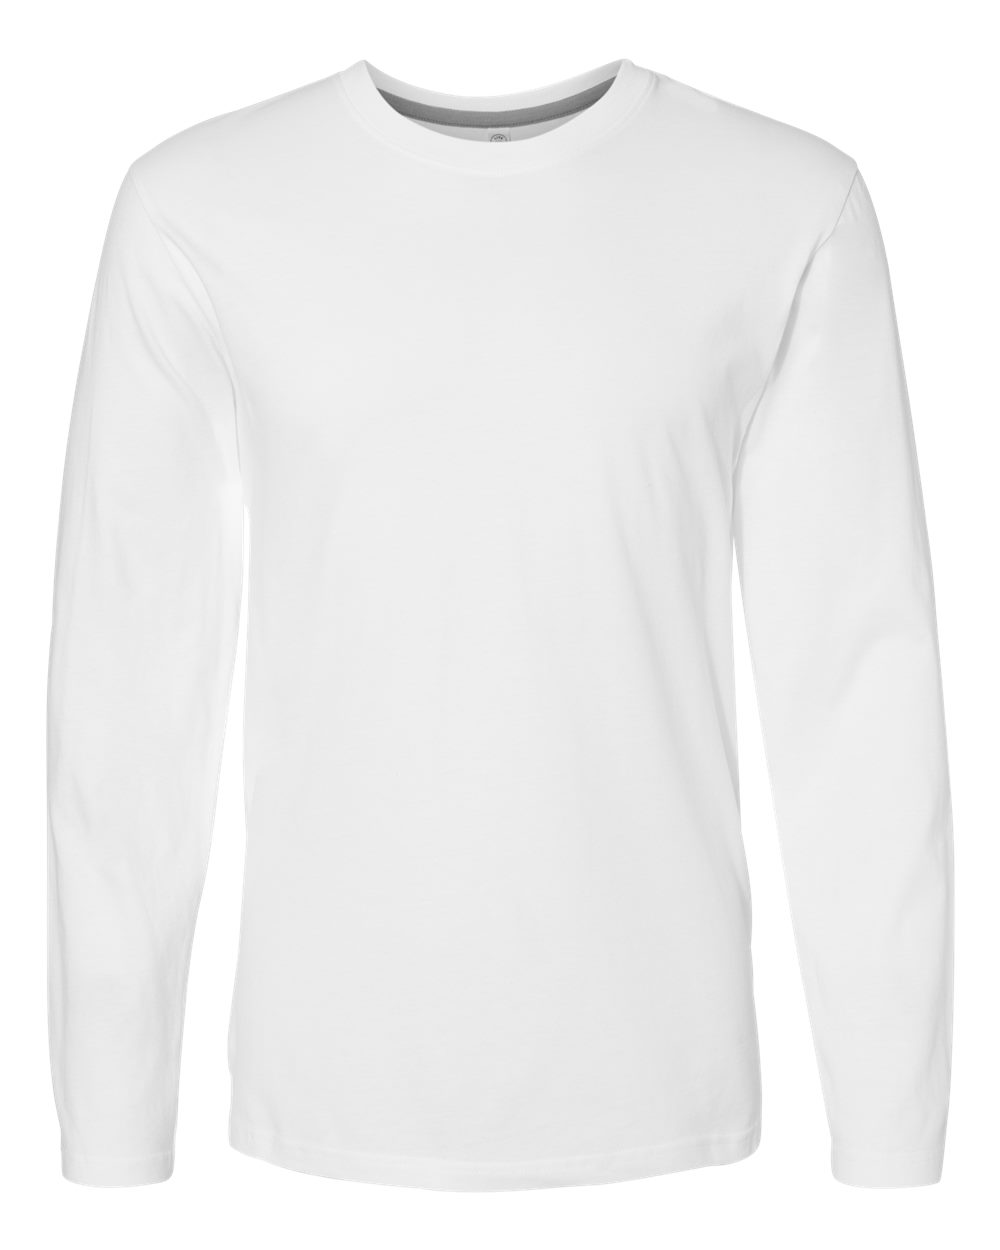 100% Combed Ringspun Cotton Long Sleeve Fine Jersey Tee-LAT